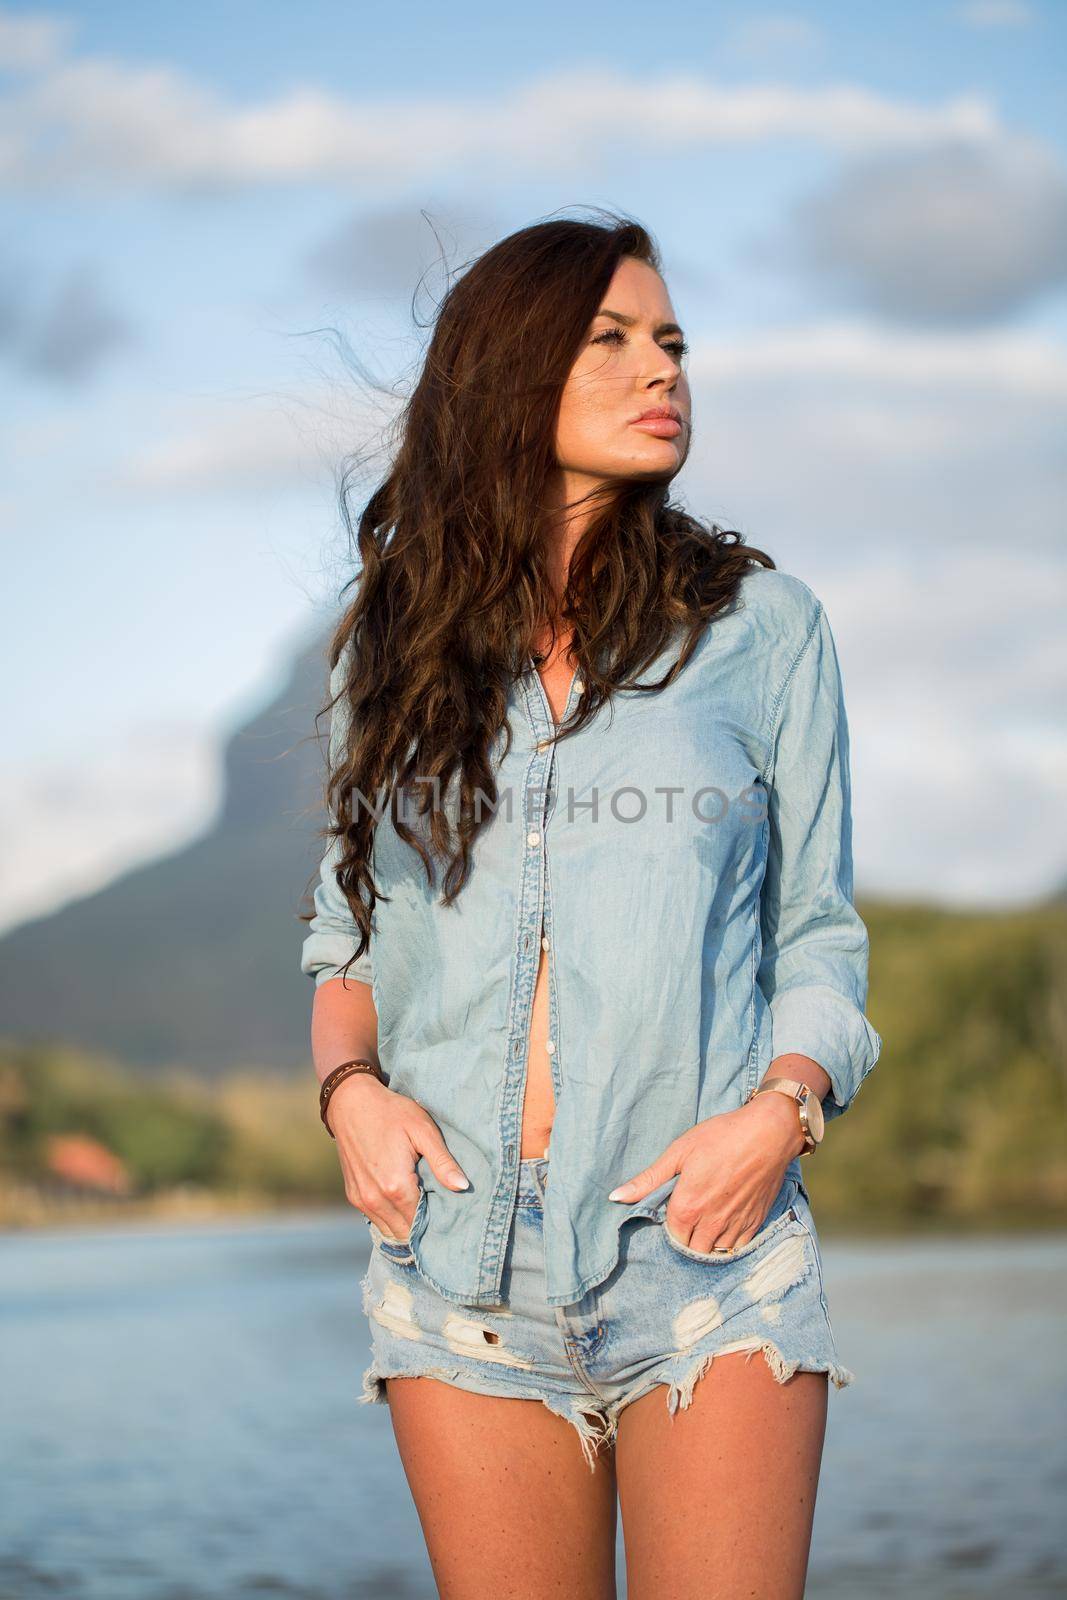 Young girl traveler stands on the beach against the mountain and enjoy the beauty of the sea landscape. Young girl loves wild life, travel, freedom by StudioPeace